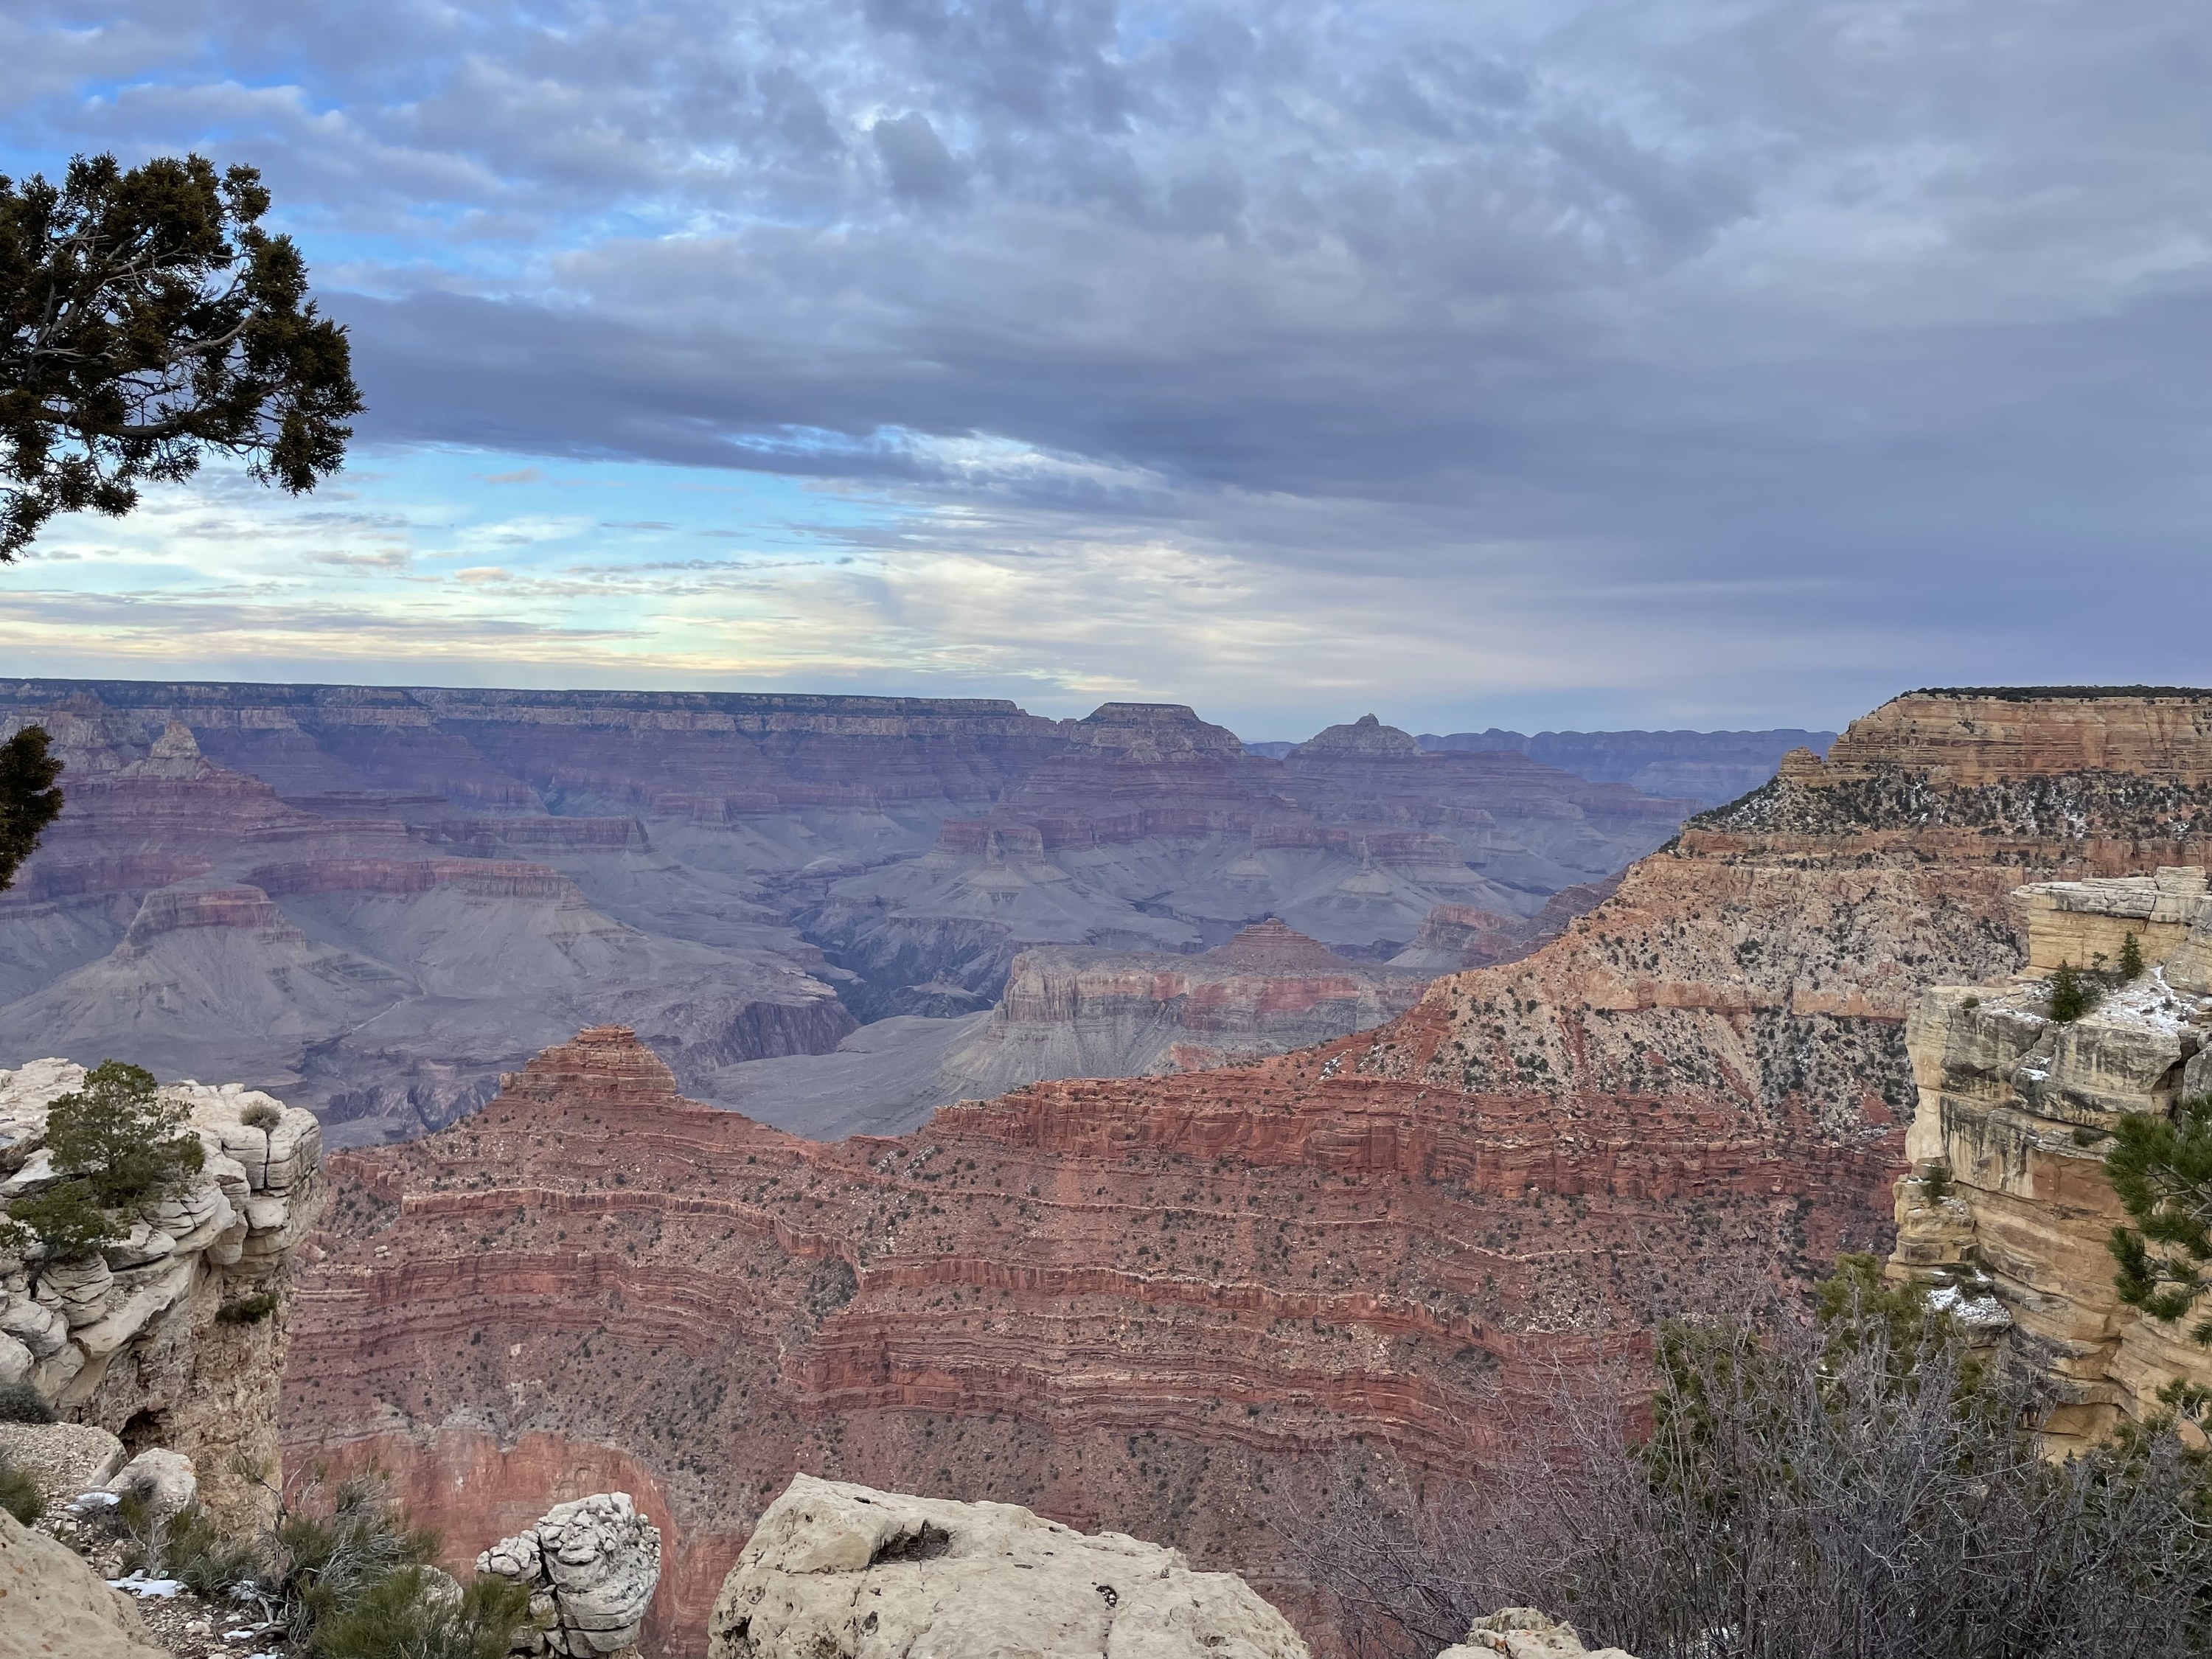 A view of the Grand Canyon from the southern rim